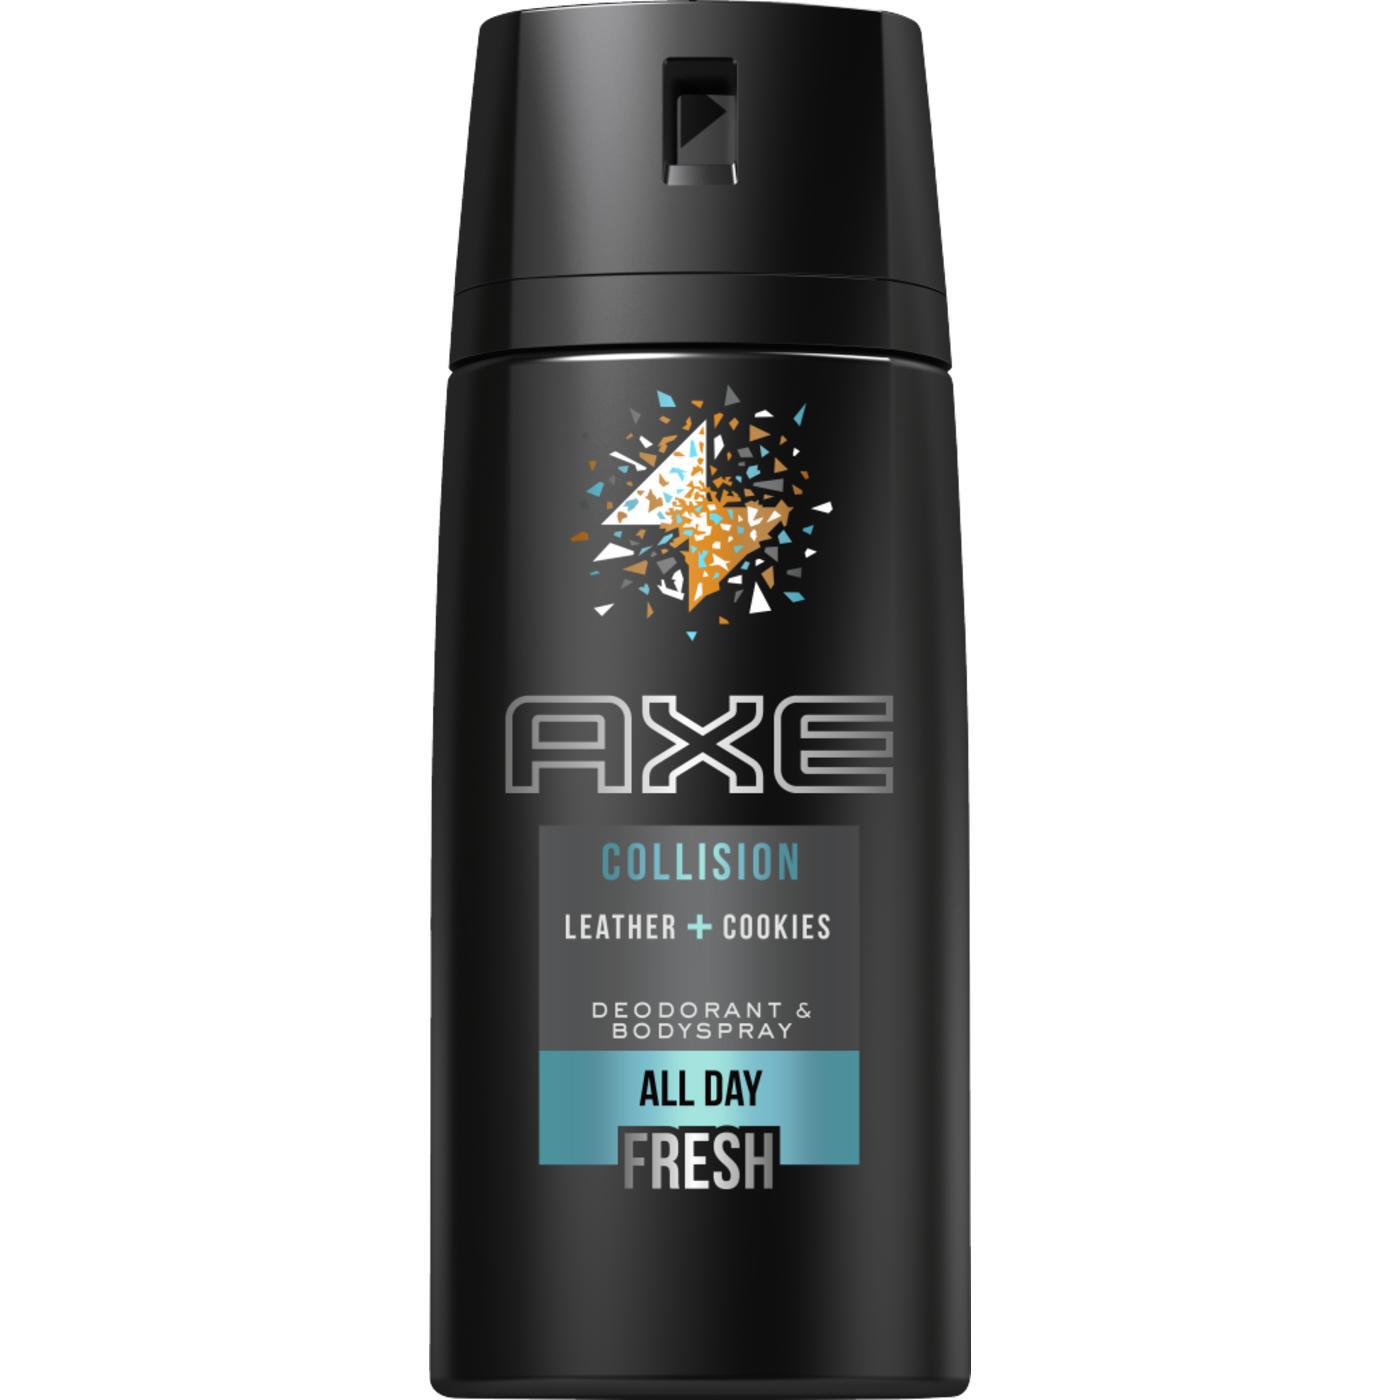 AXE Bodyspray "Collision Leather & Cookies" all day fresh - 150 ml